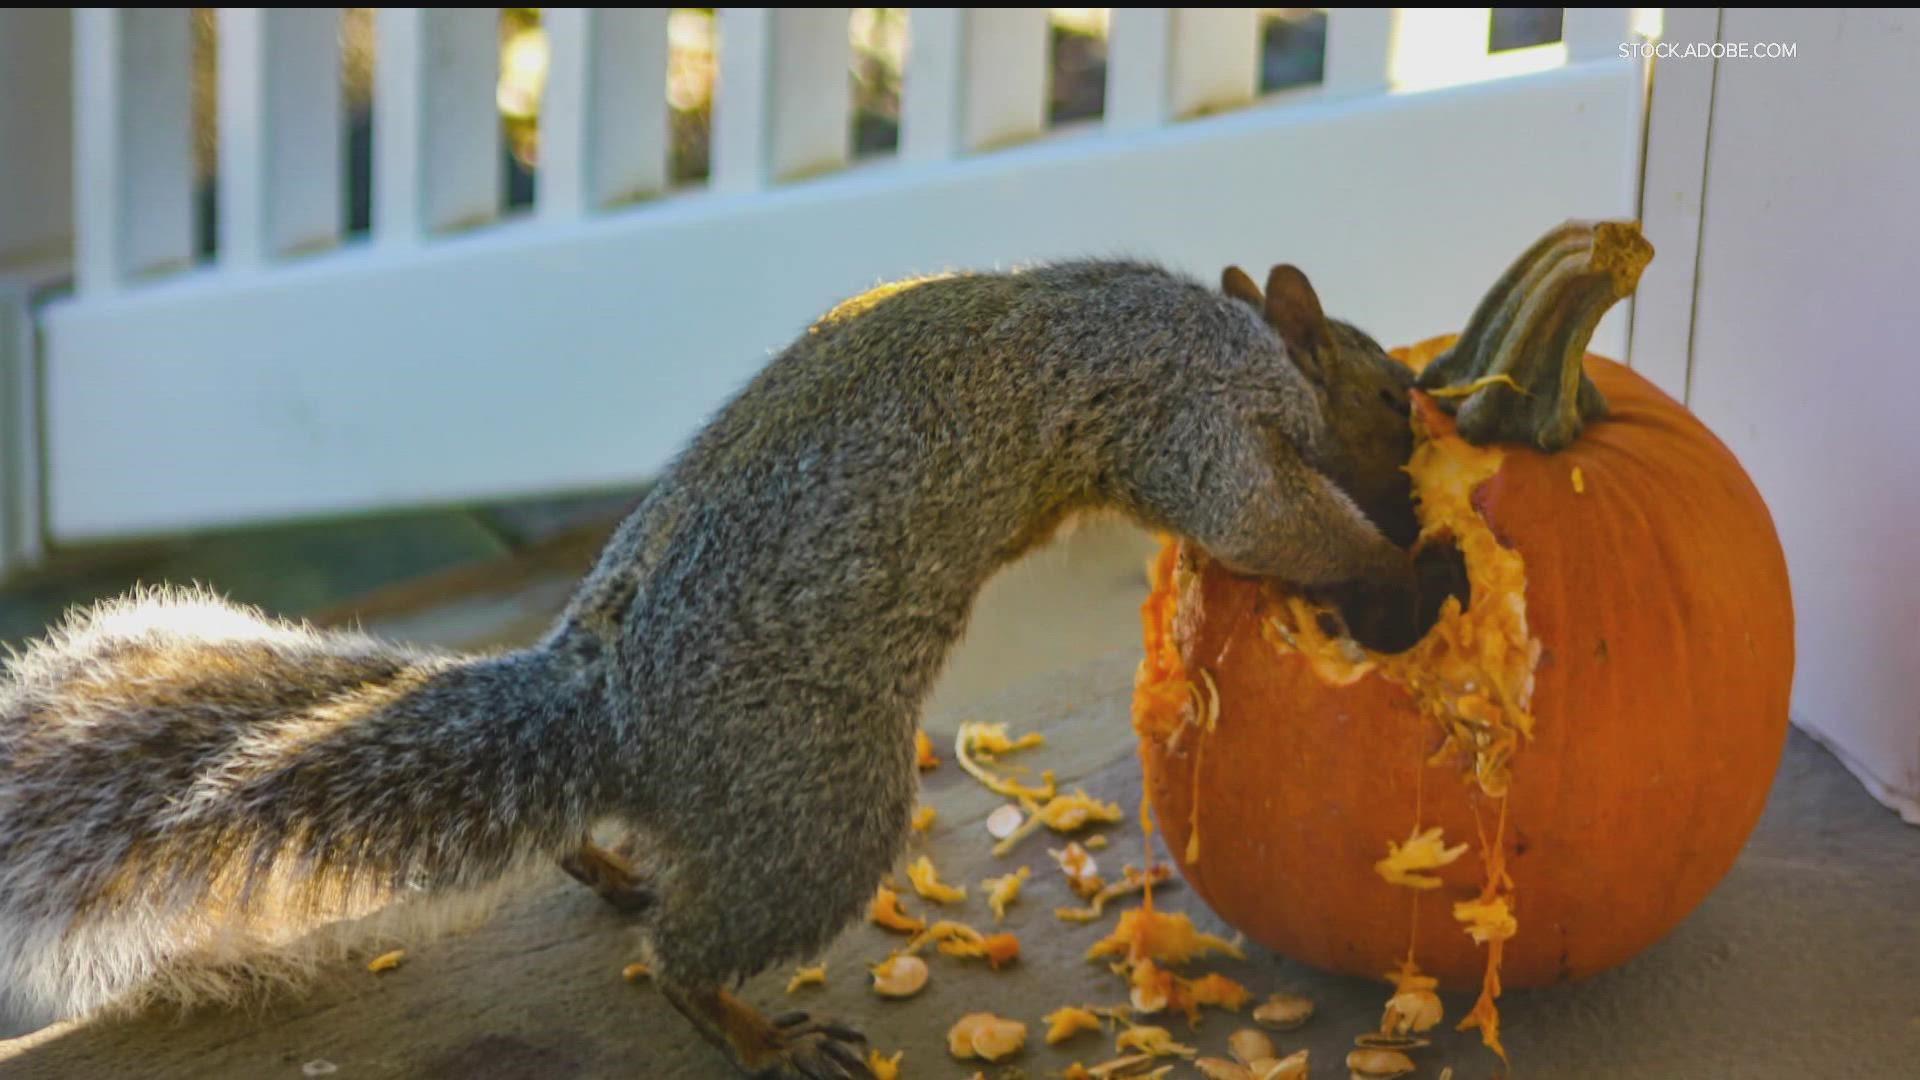 Eva Andersen reports on where and how to dispose of your pumpkins.